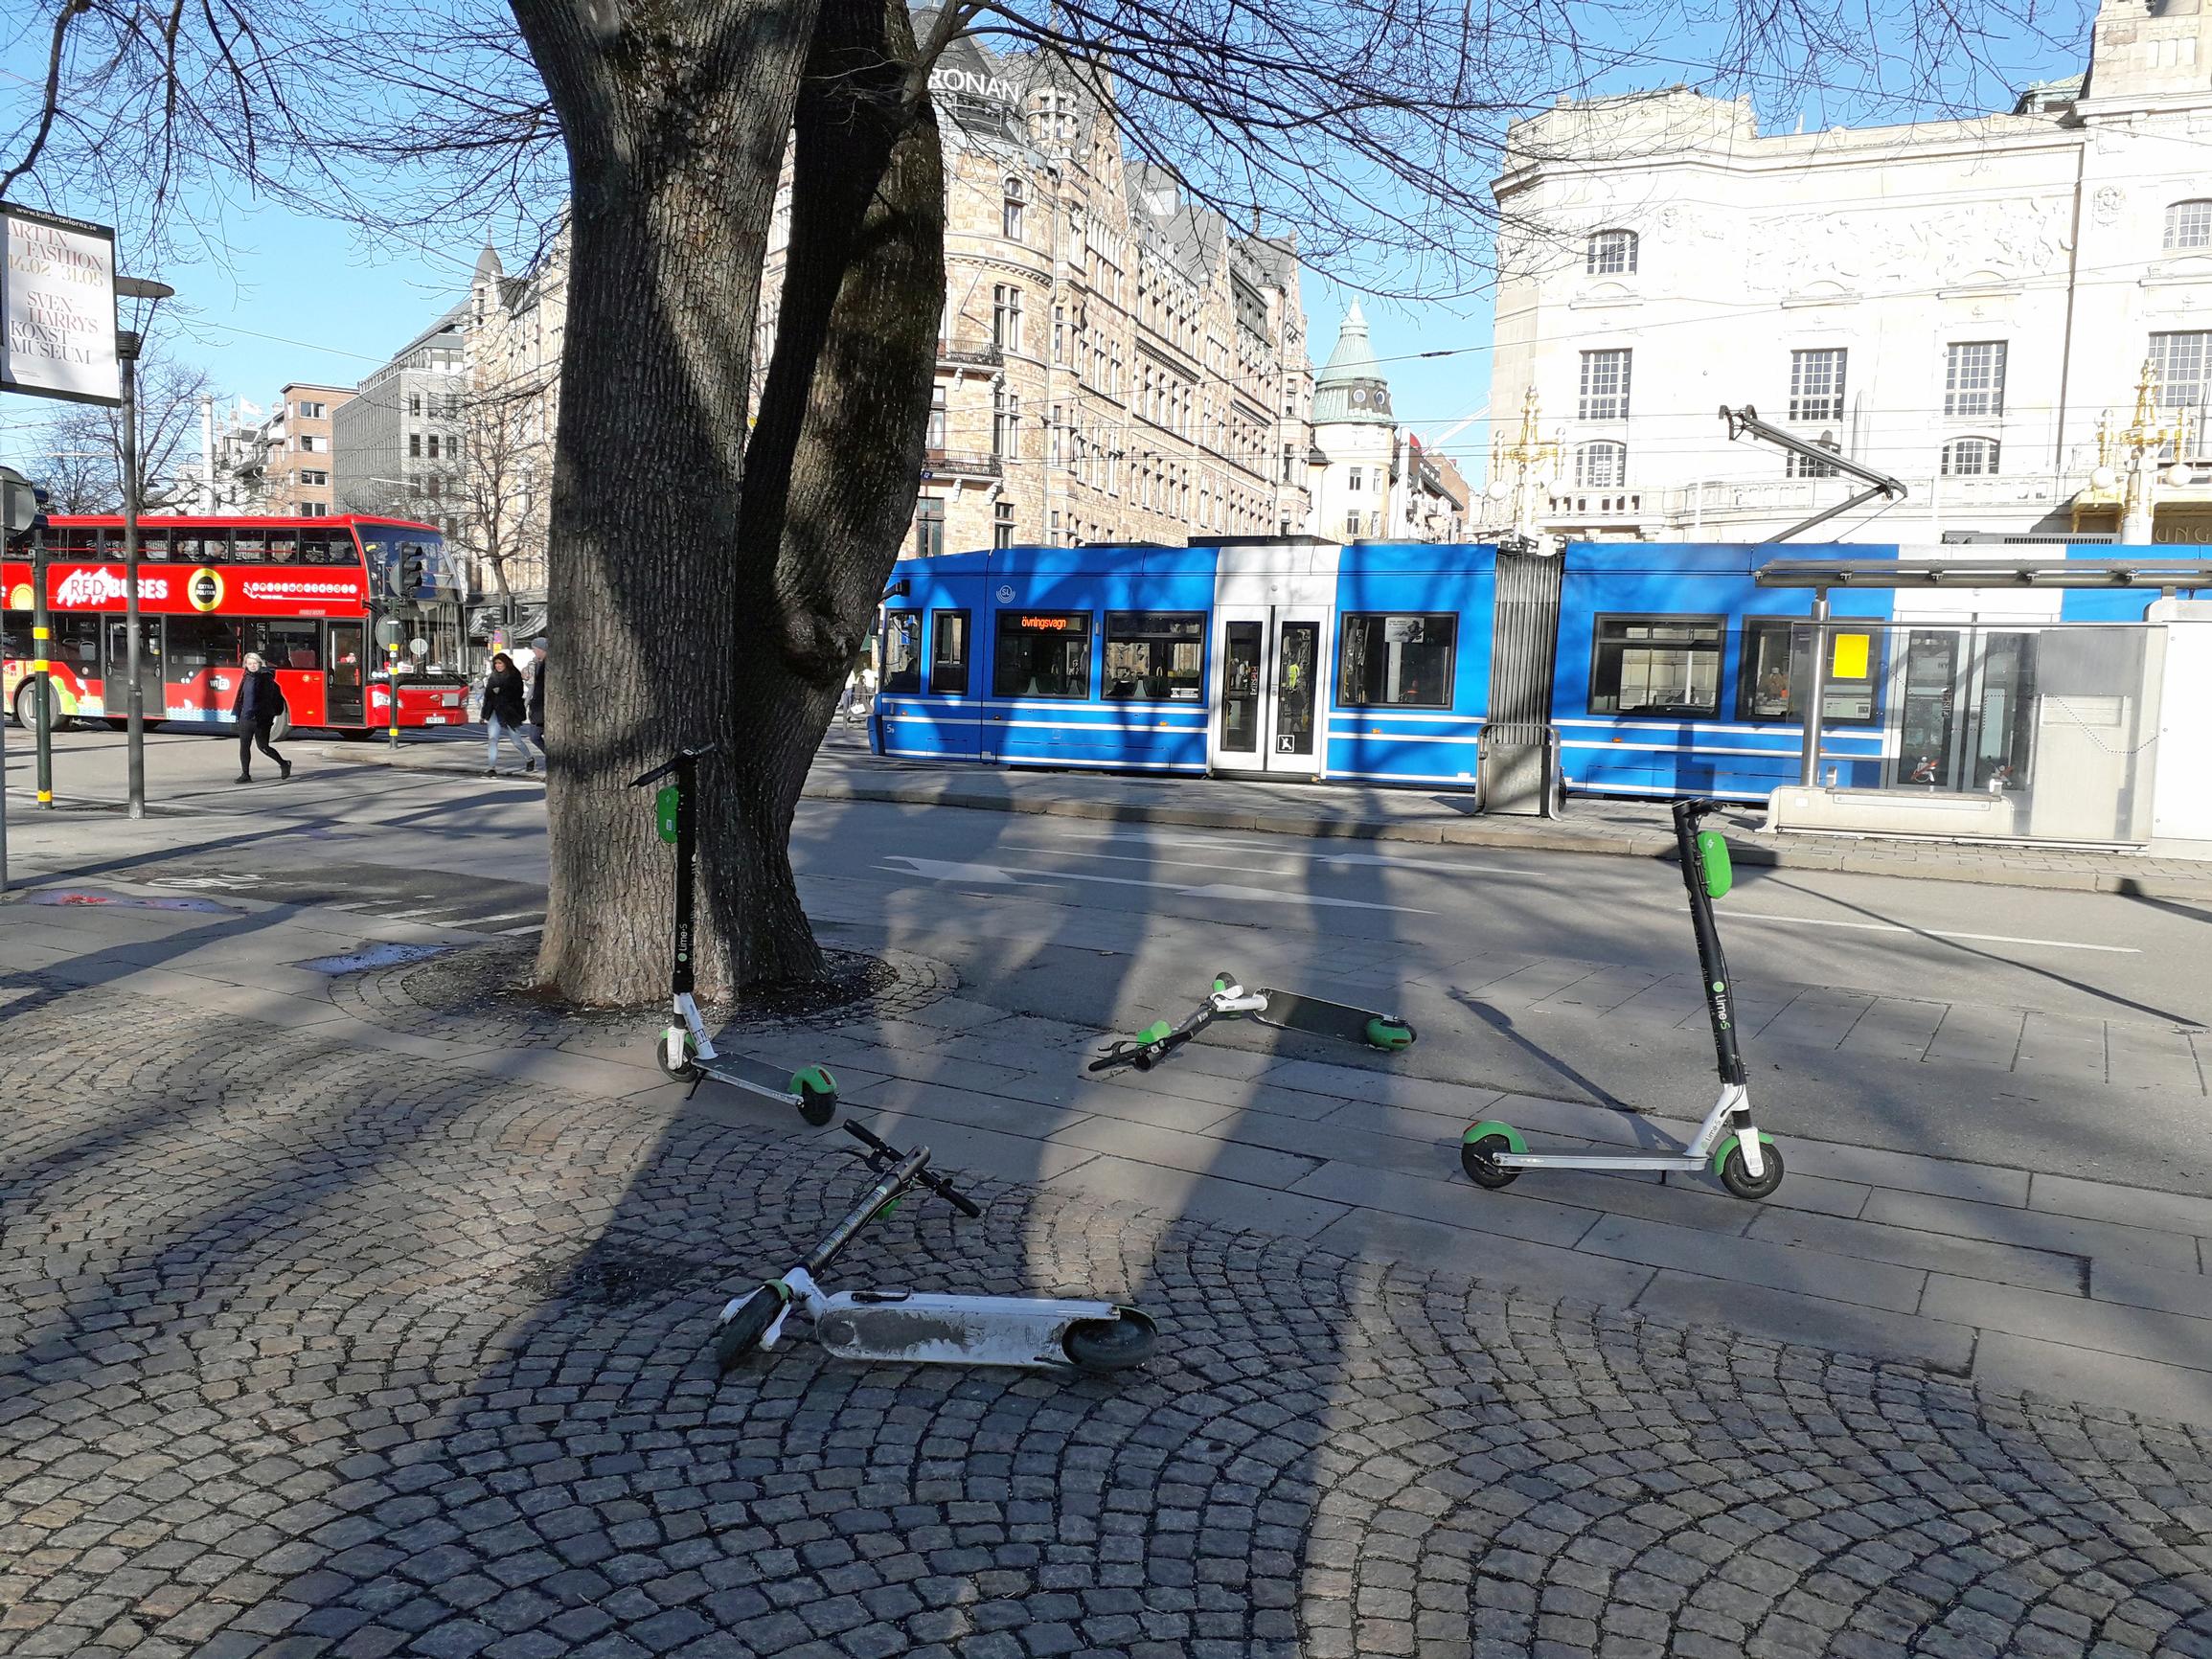 Rental e-scooters on a Stockholm street